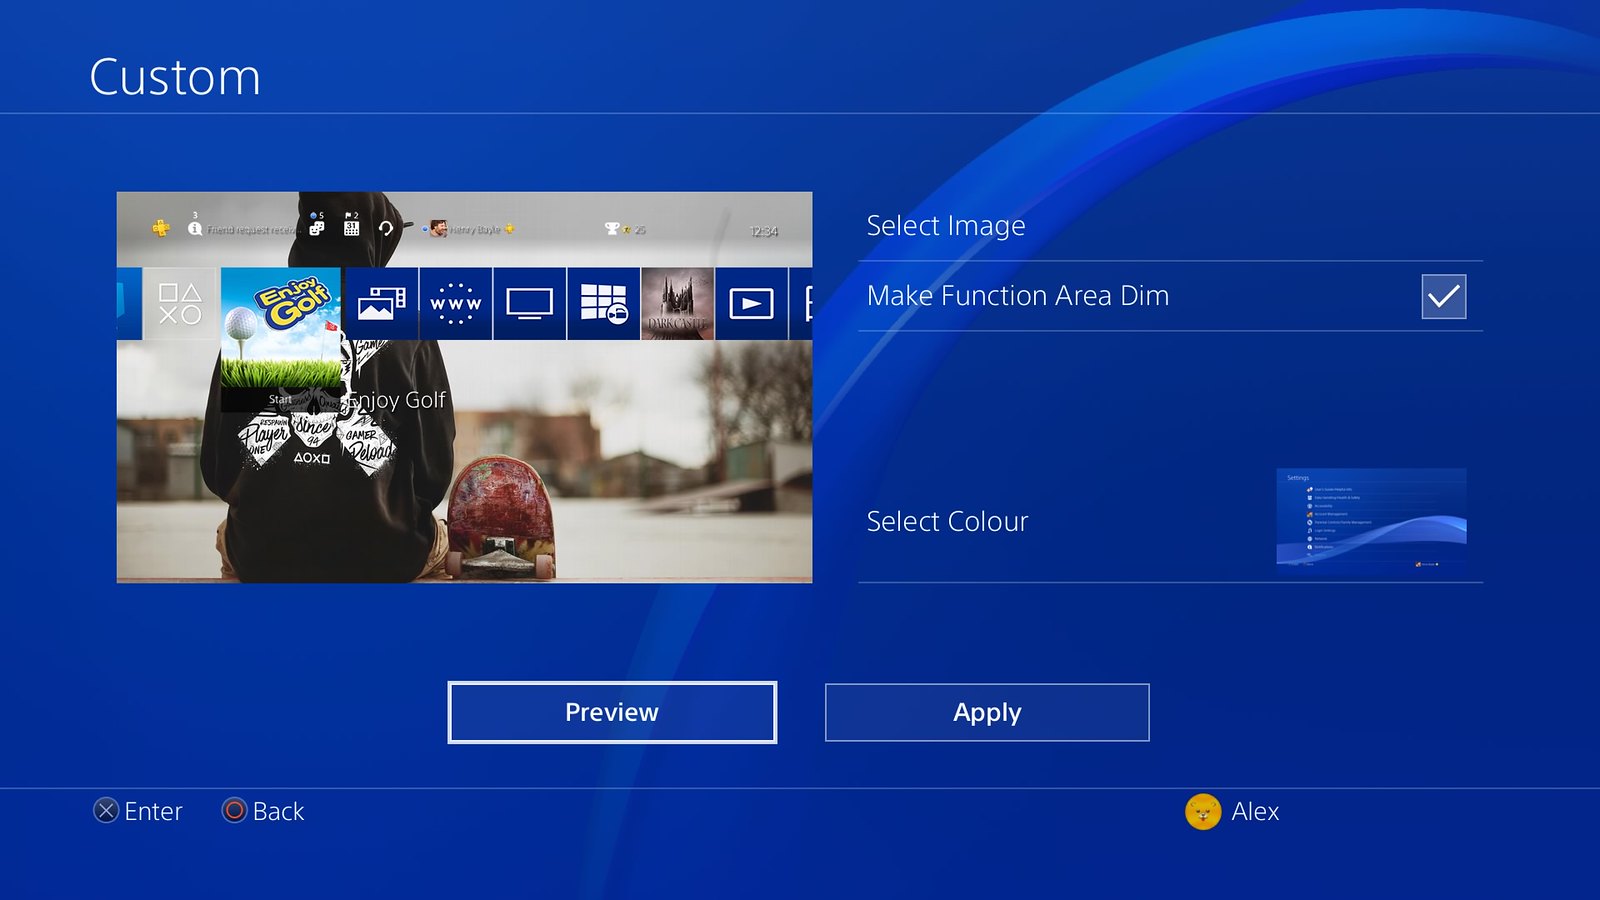 Ps4 Screenshot Now That We Can Set Custom Wallpapers I D Like The Option To Choose The Icons Of Any Theme That I Own And Use Custom Wallpapers With It Ps4